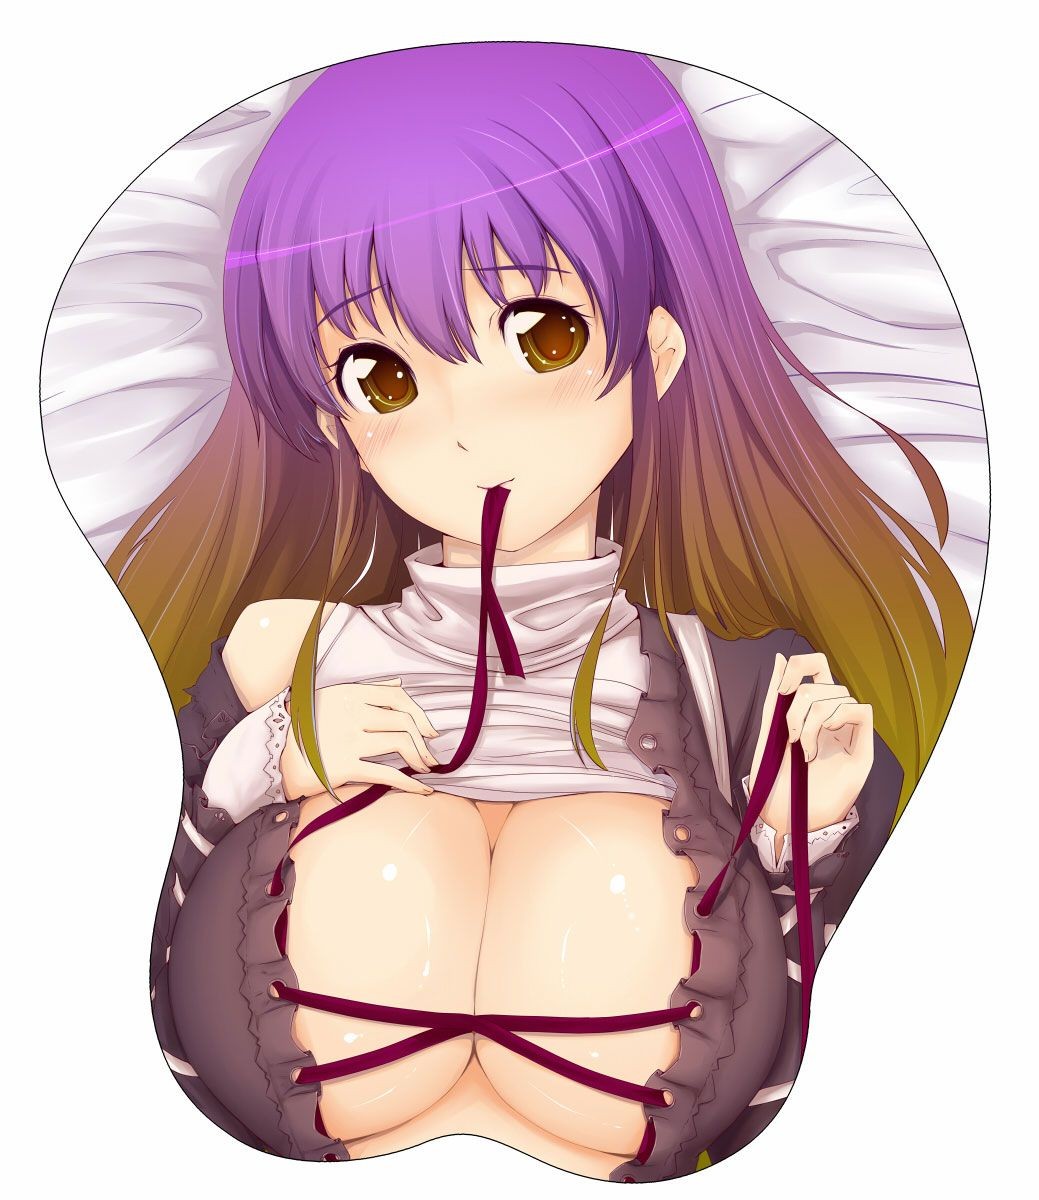 Lick 2D And. Oppai Mouse Pad Want Erotic Images, 50 Sheets Full